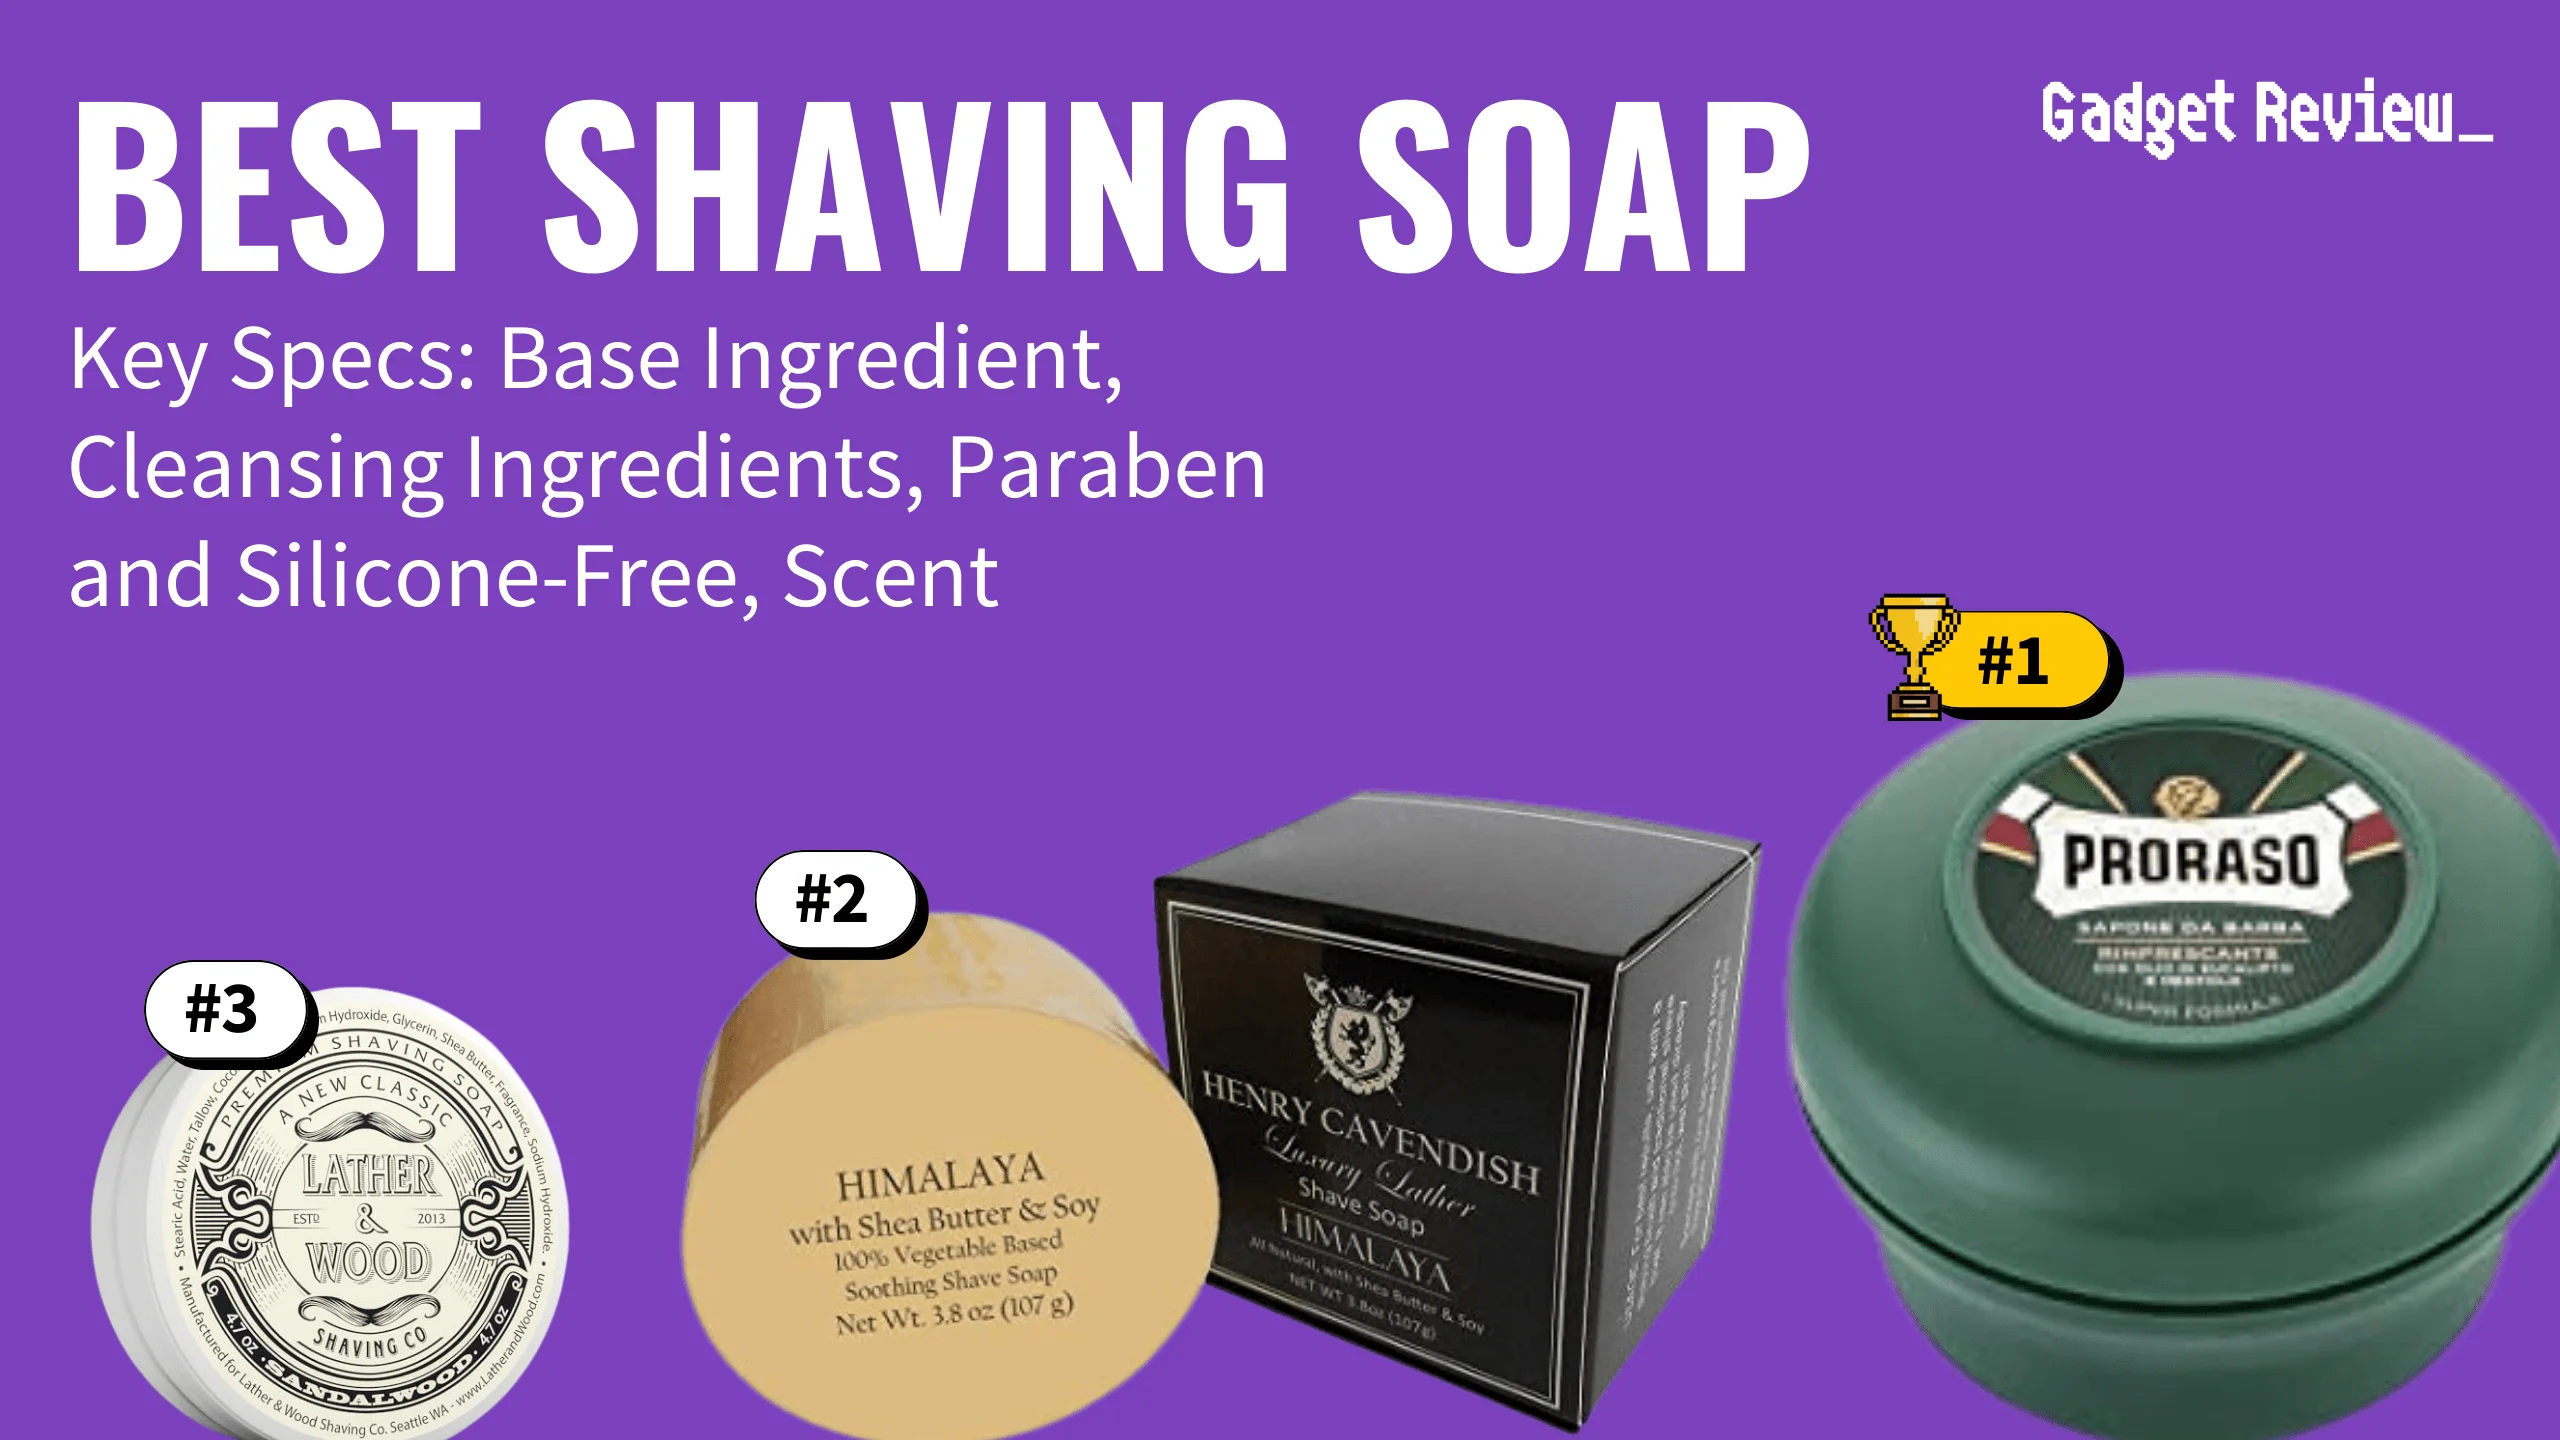 best shaving soap featured image that shows the top three best bathroom essential models